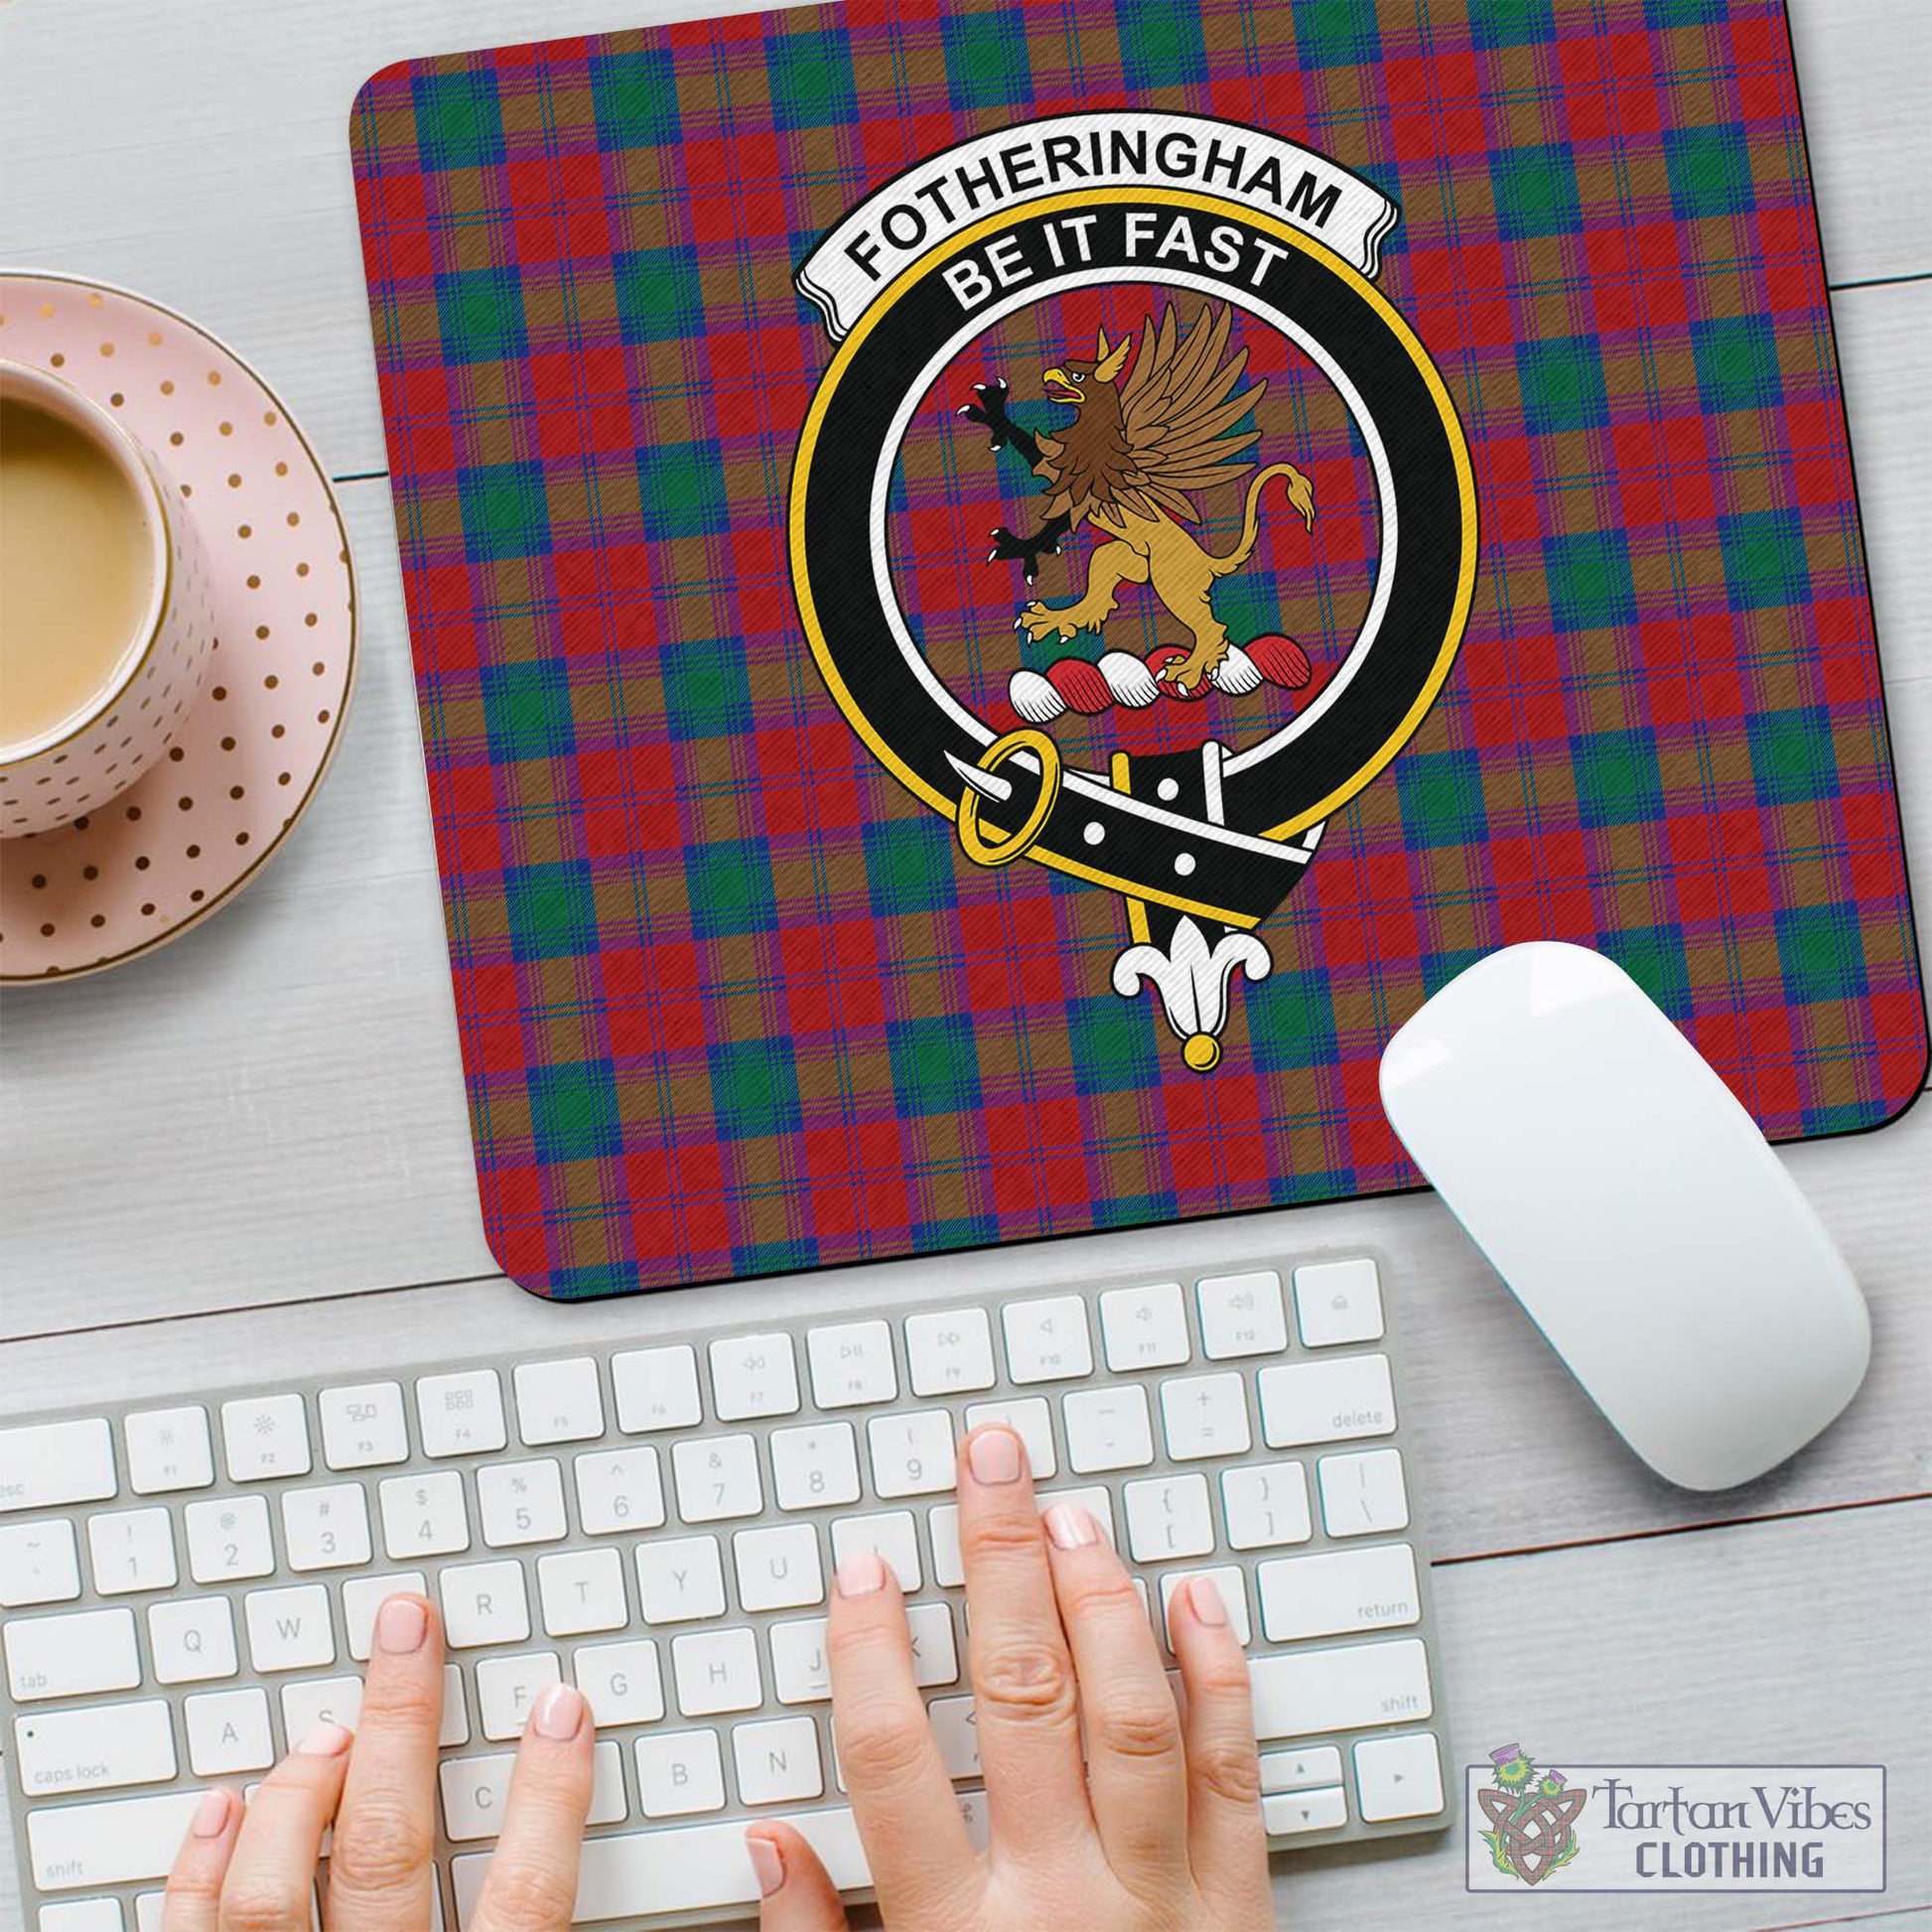 Tartan Vibes Clothing Fotheringham Modern Tartan Mouse Pad with Family Crest